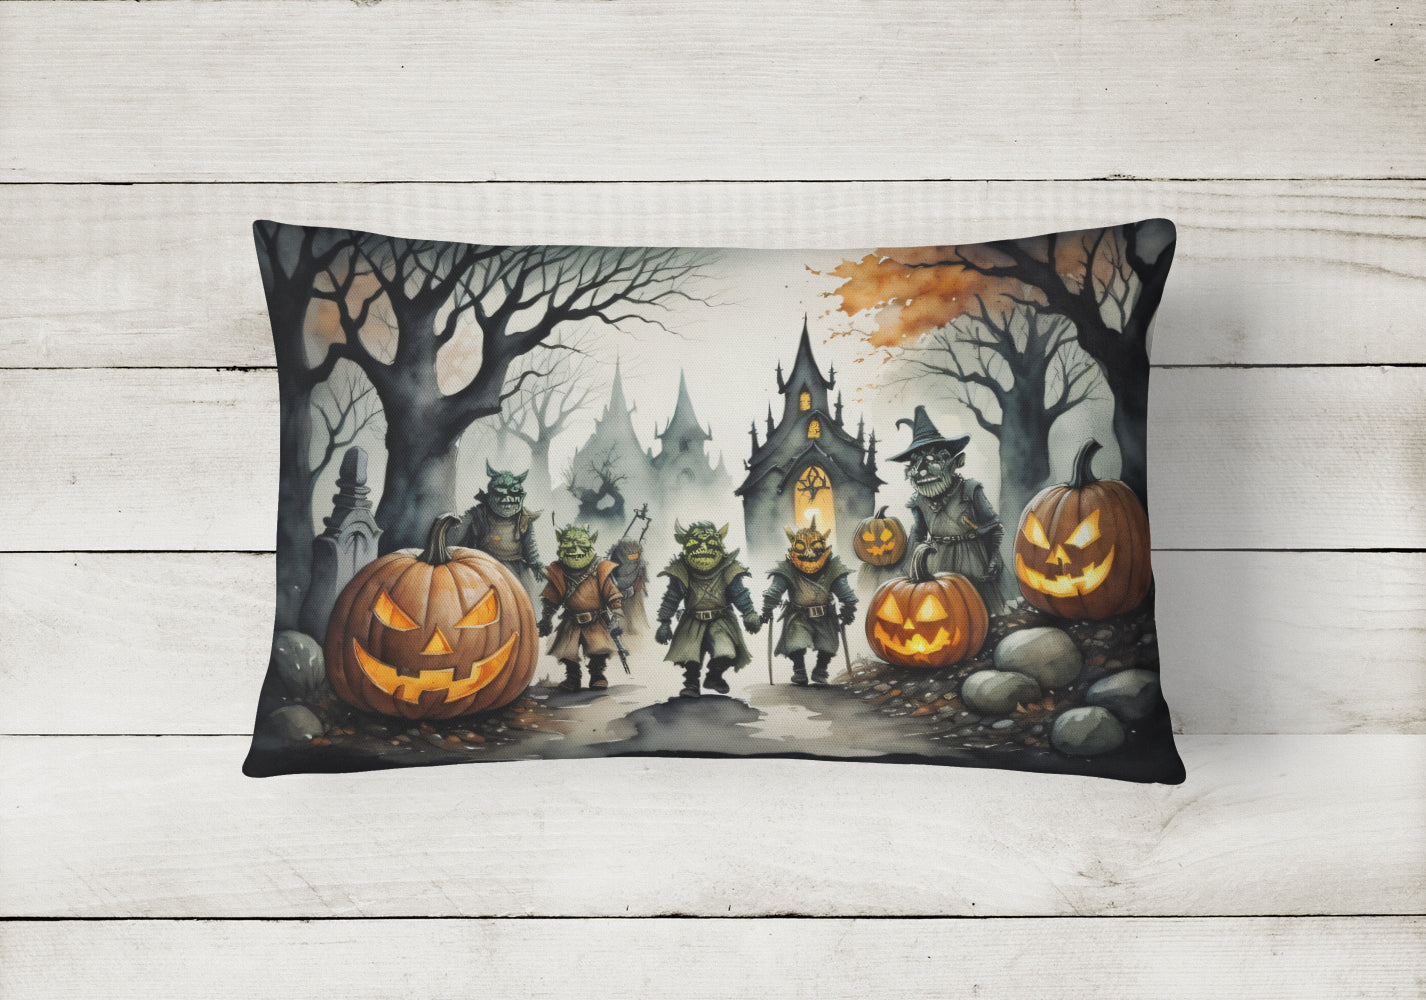 Buy this Orcs Spooky Halloween Fabric Decorative Pillow